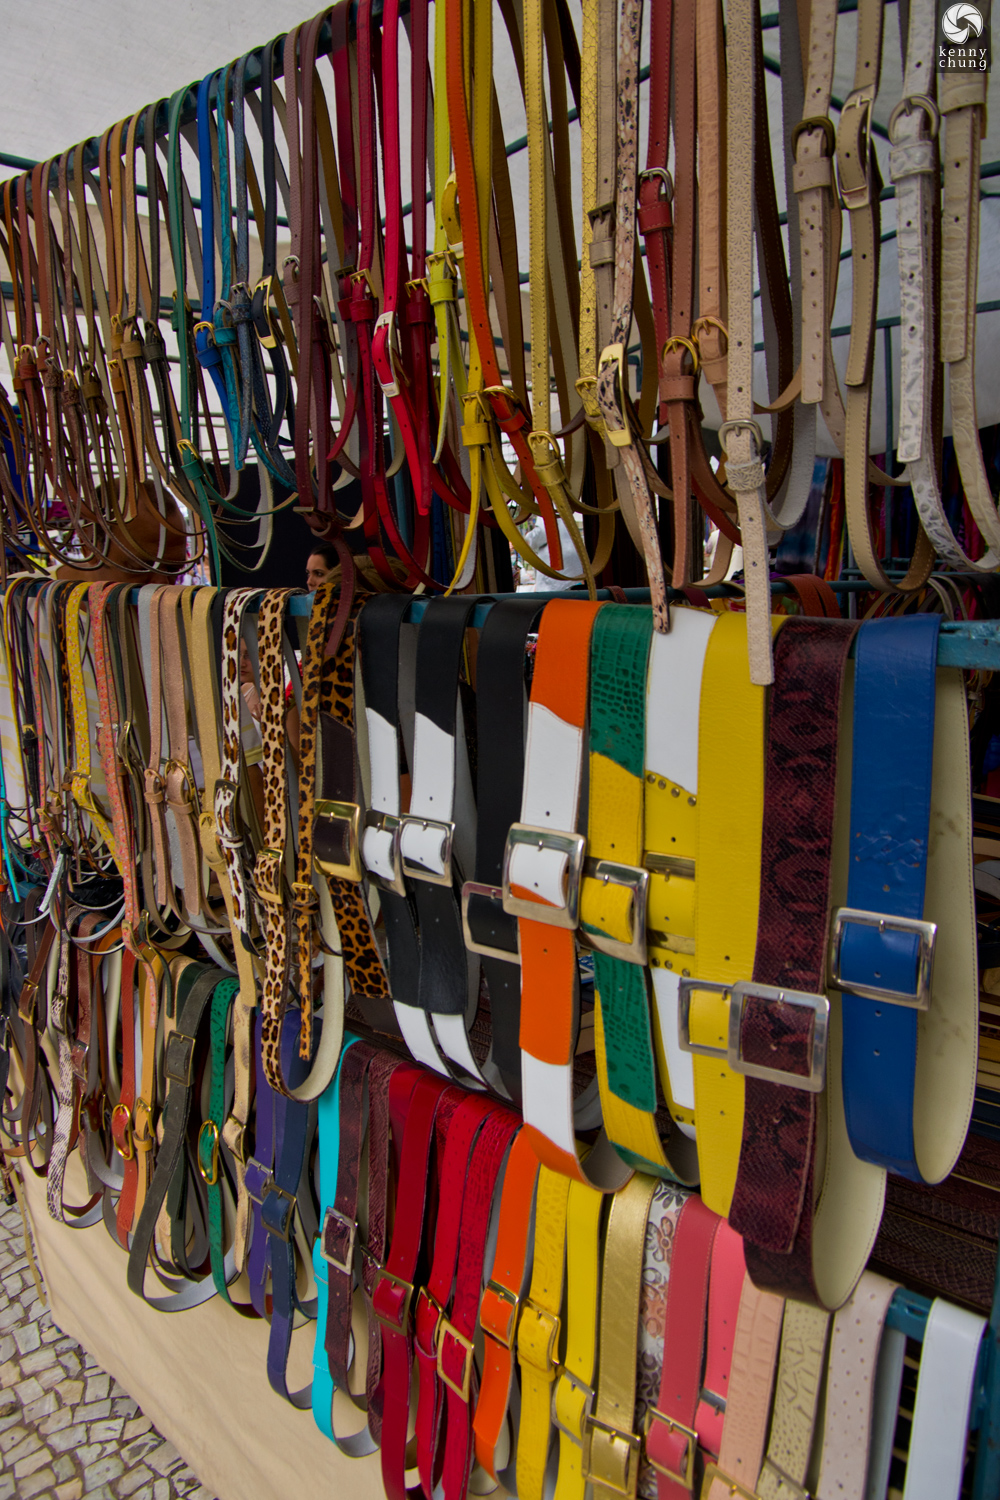 Colorful belts for sale at the Ipanema Hippie Fair.